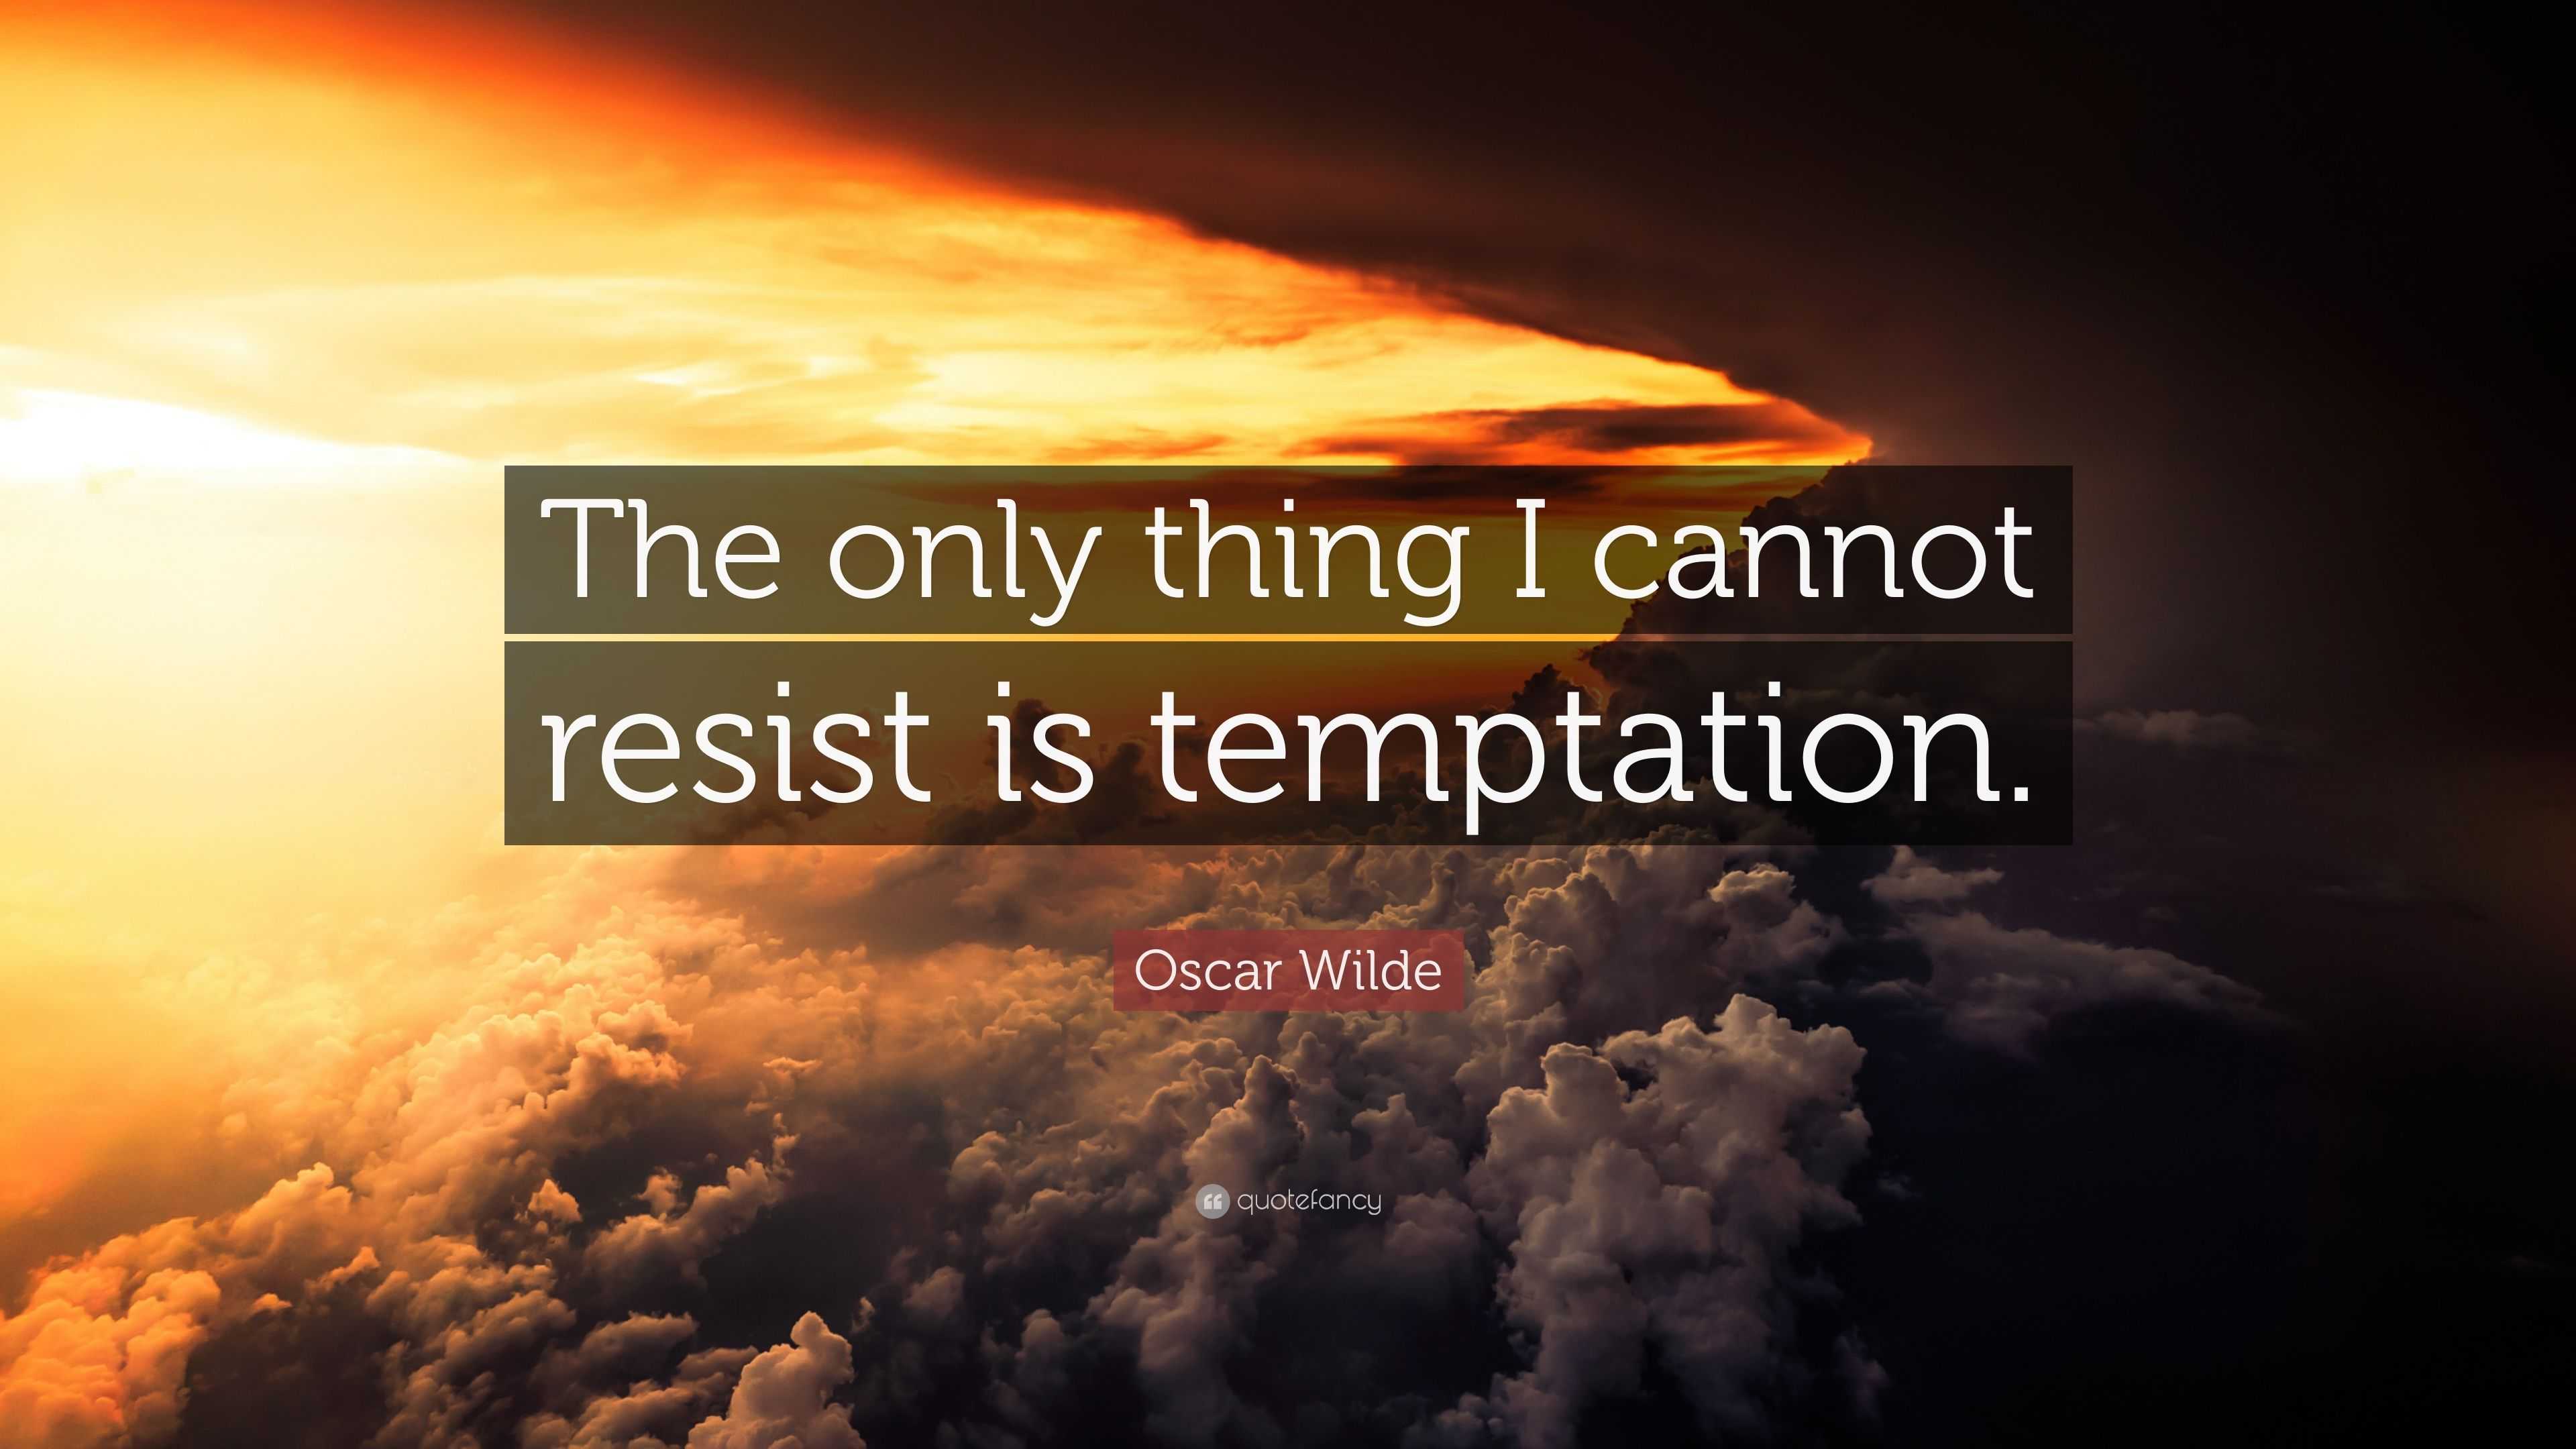 Oscar Wilde Quote: "The only thing I cannot resist is temptation." (7 wallpapers) - Quotefancy